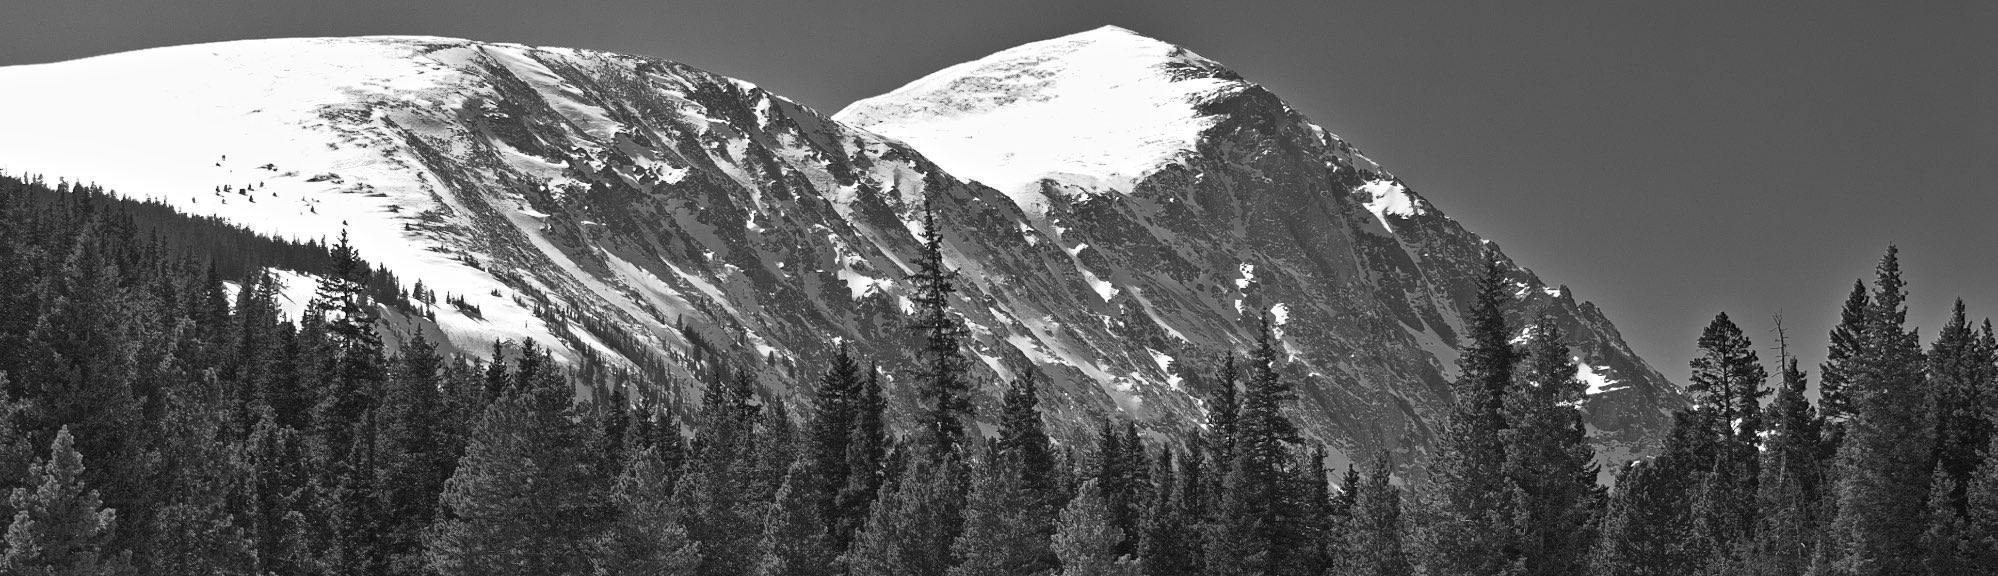 Snow covered mountains and trees, near Hoosier Pass, CO